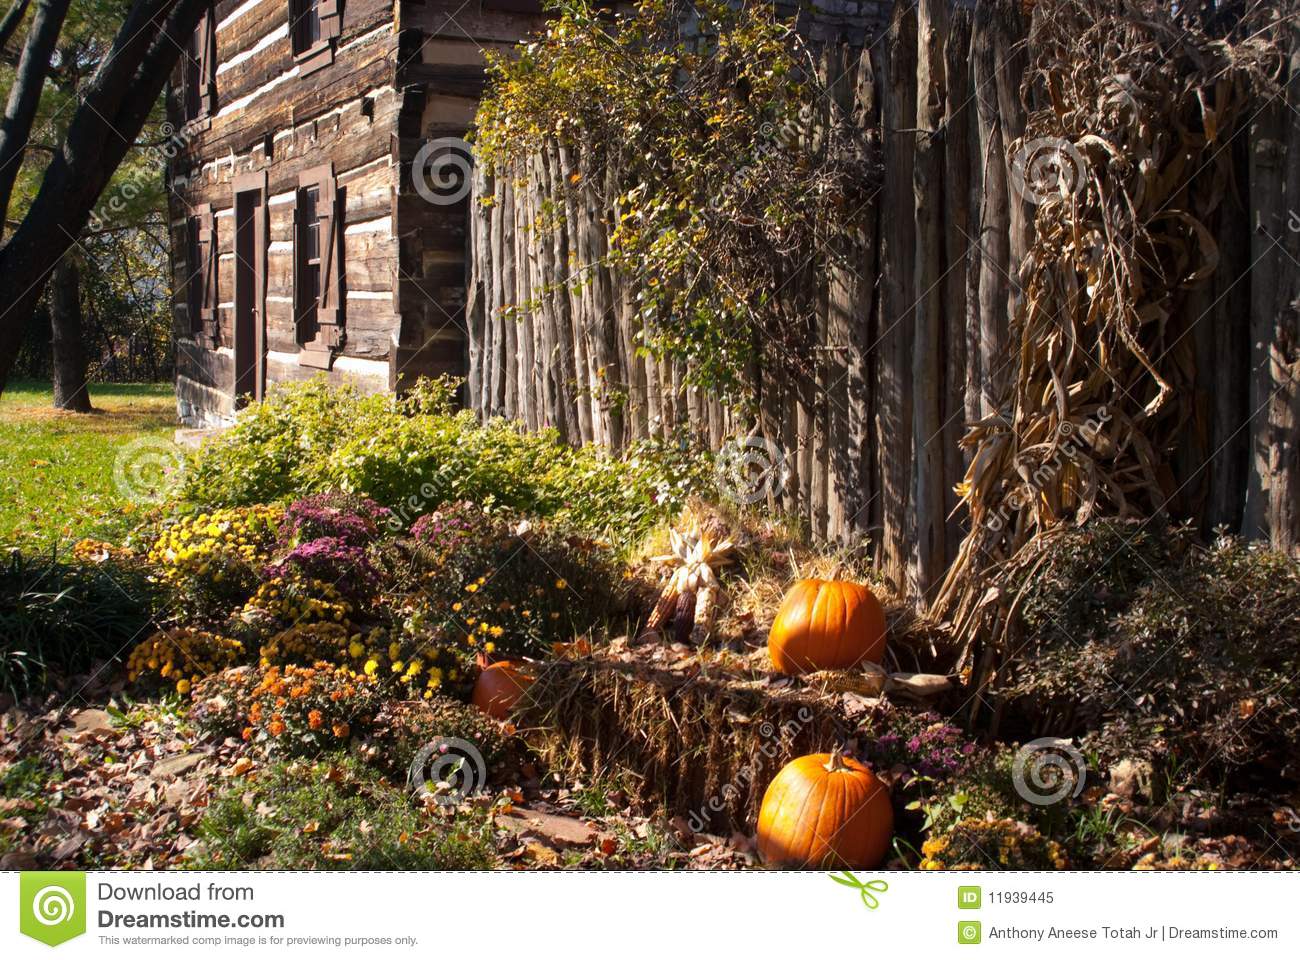 Rustic Fall Setting Of Old Log Cabin With Pumpkins Gourds Indian